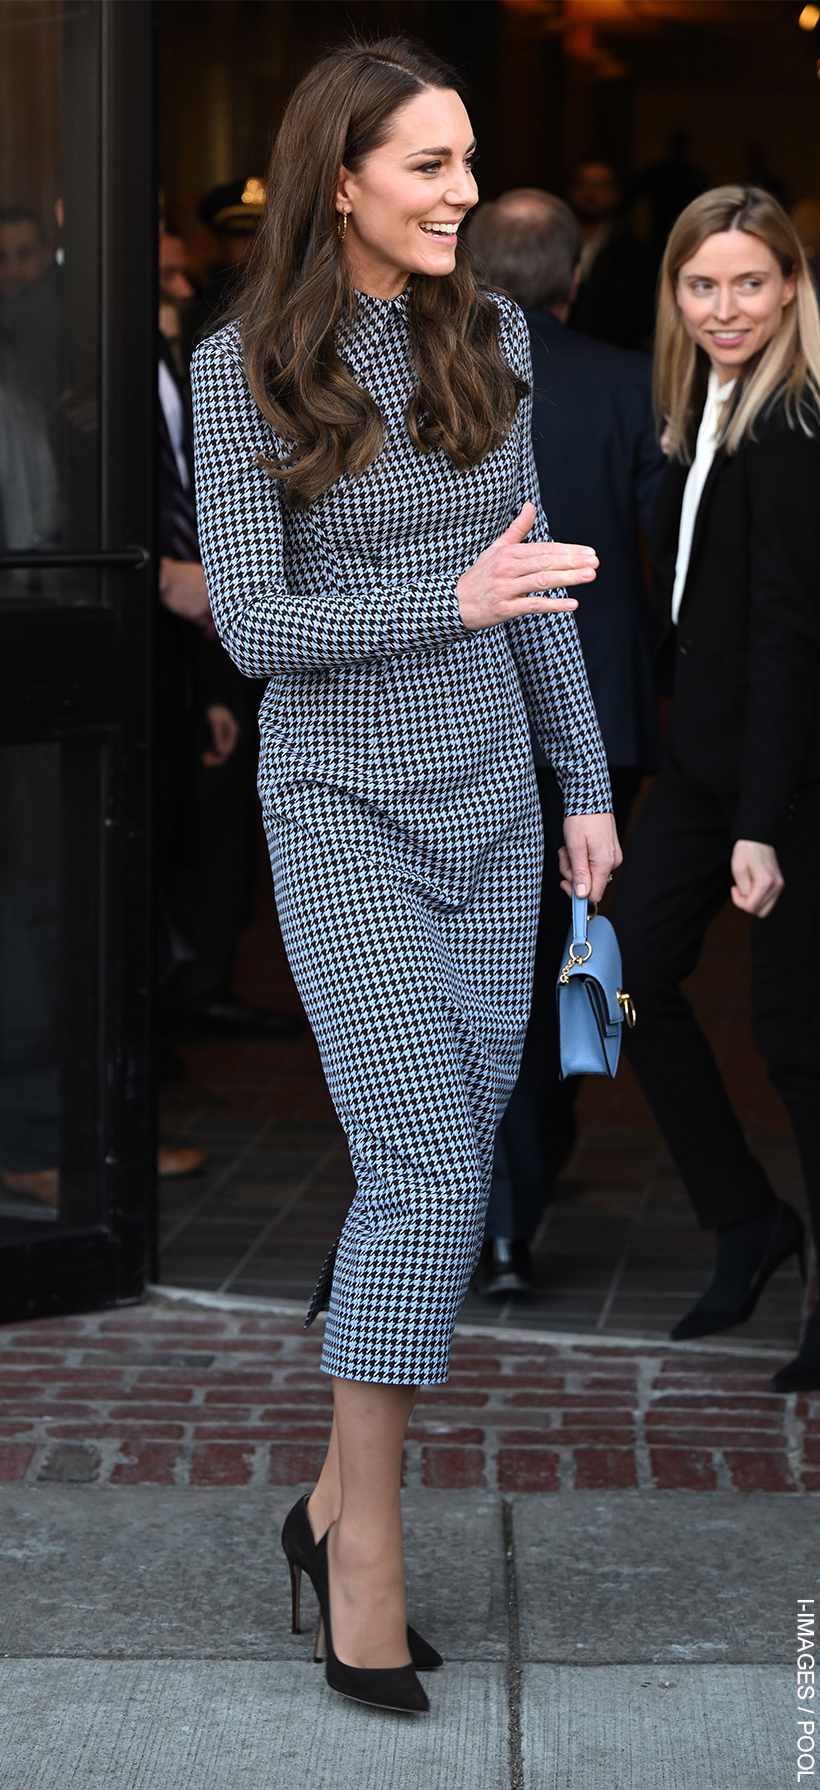 Kate Middleton's most polished and professional look yet? Princess